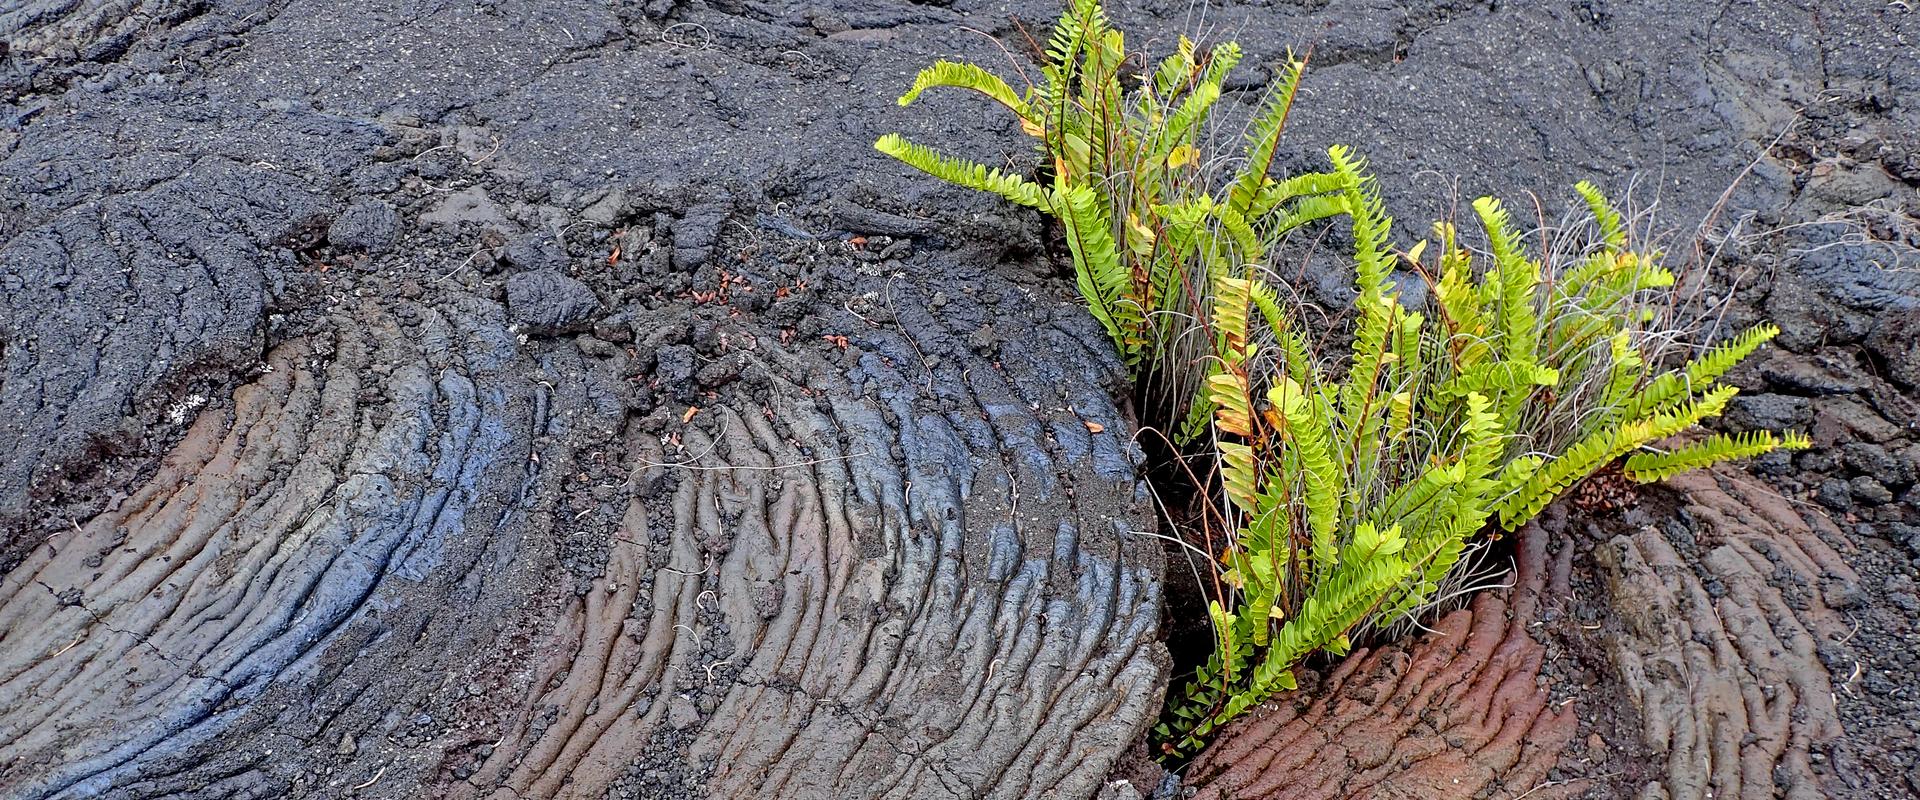 Fern surrounded by lava rope, from lava flow in 1977 in Piton-Sainte-Rose, Reunion Island